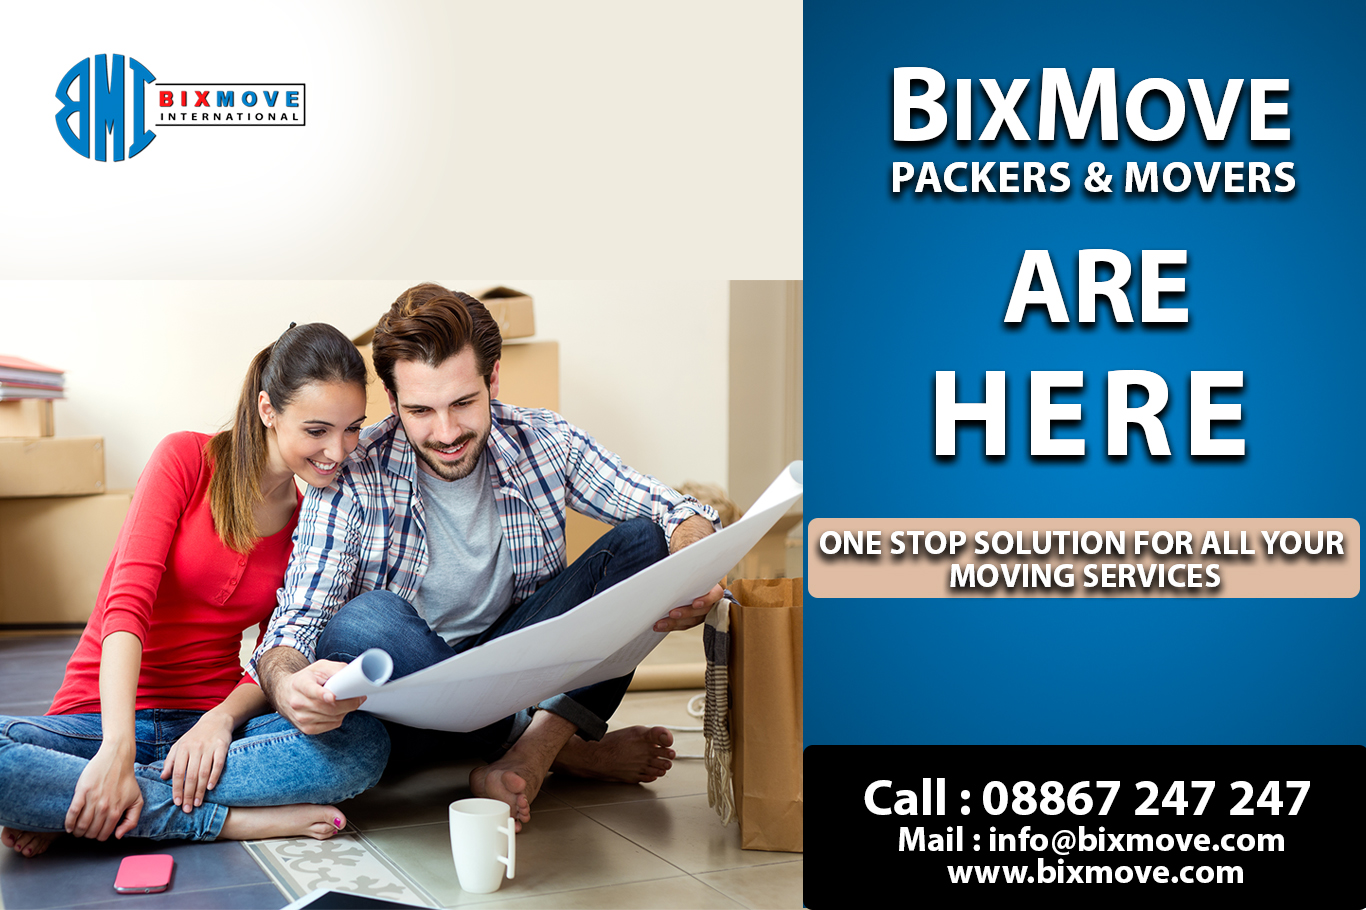 Bixmove Packers and Movers